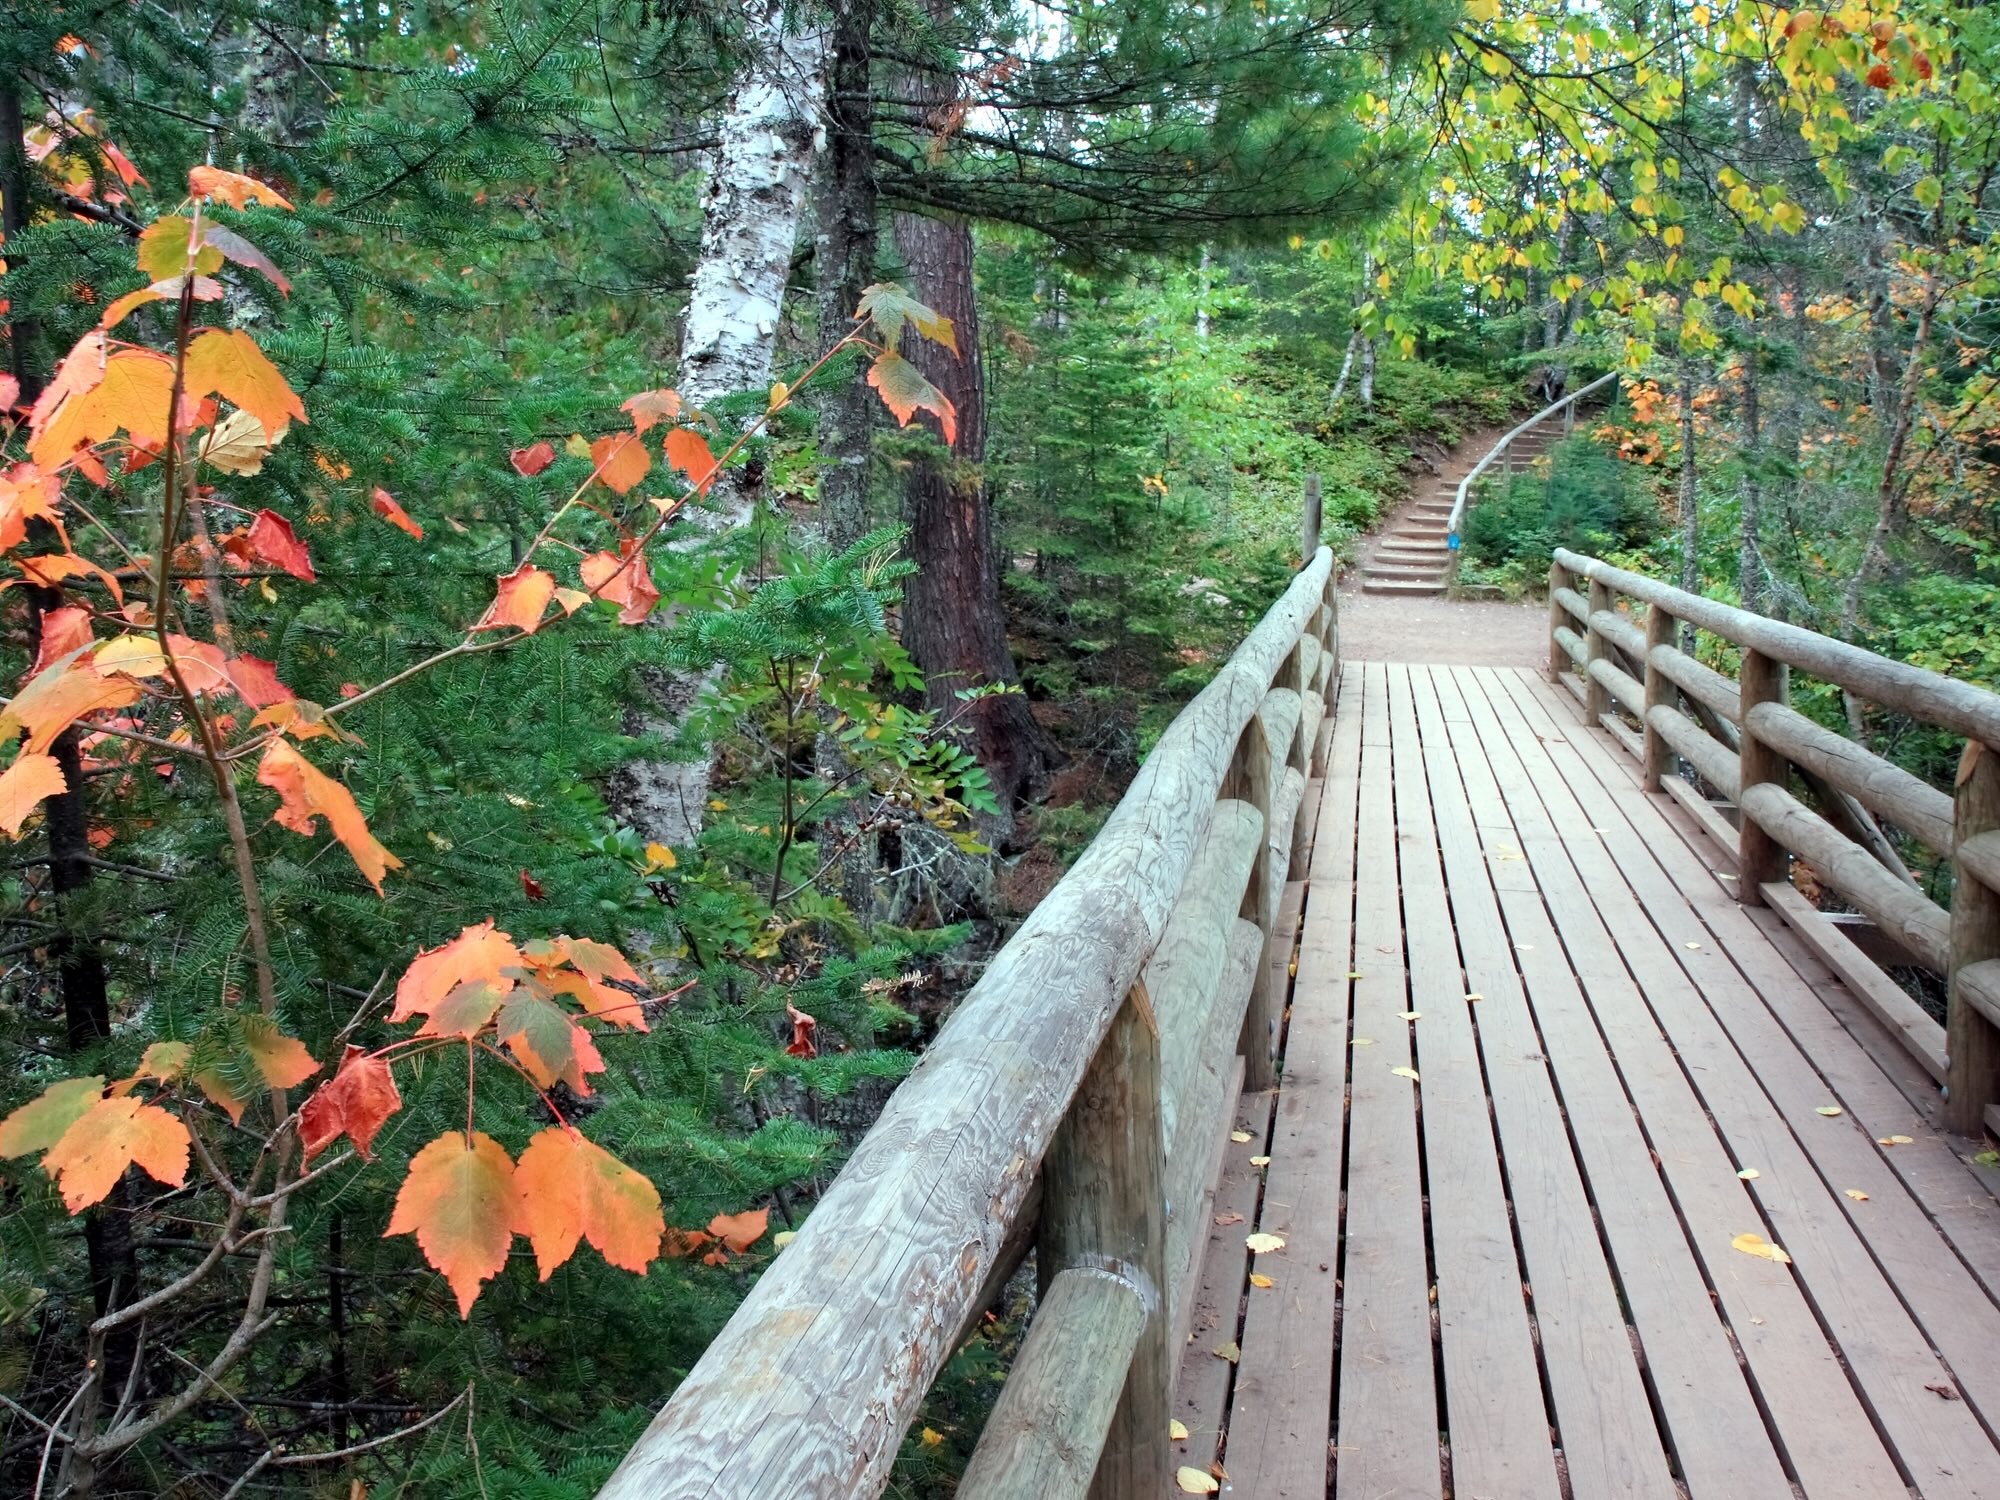 Wooden bridge that leads to a staircase on a hiking trail. Fall colors can be seen on trees to the left of the bridge.